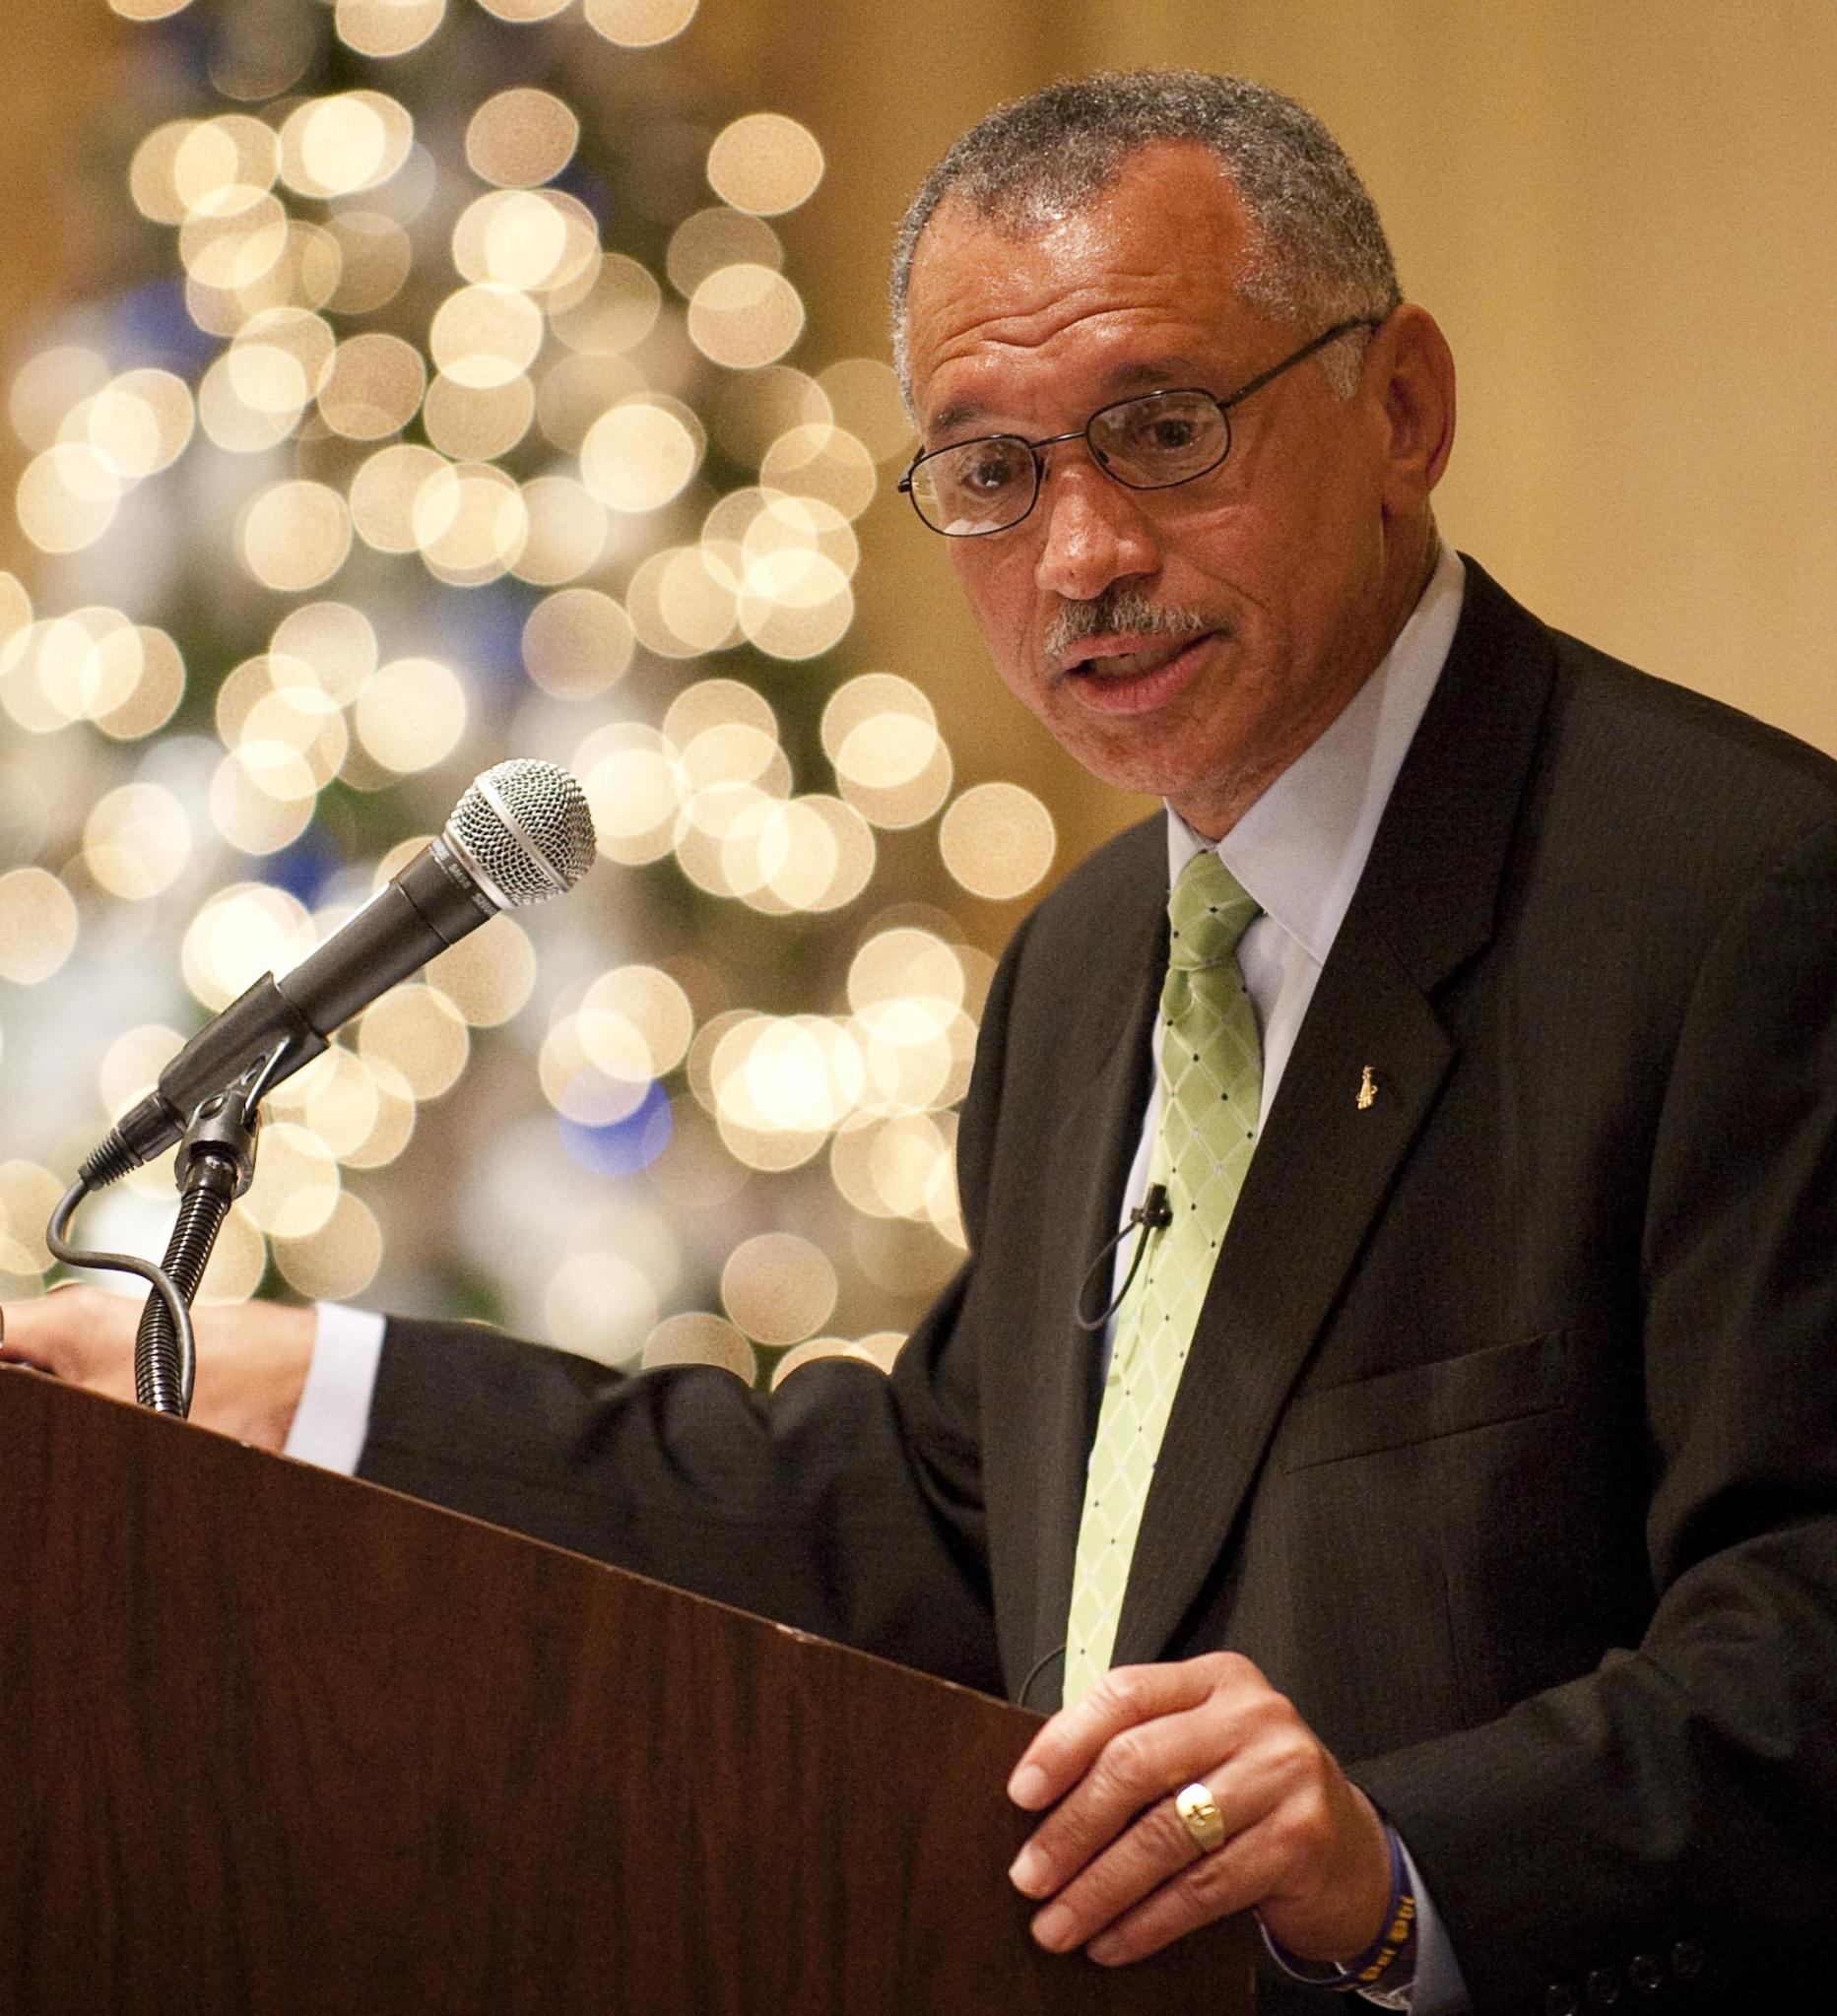 Administrator Bolden Speaks at AAIA-WIA Luncheon